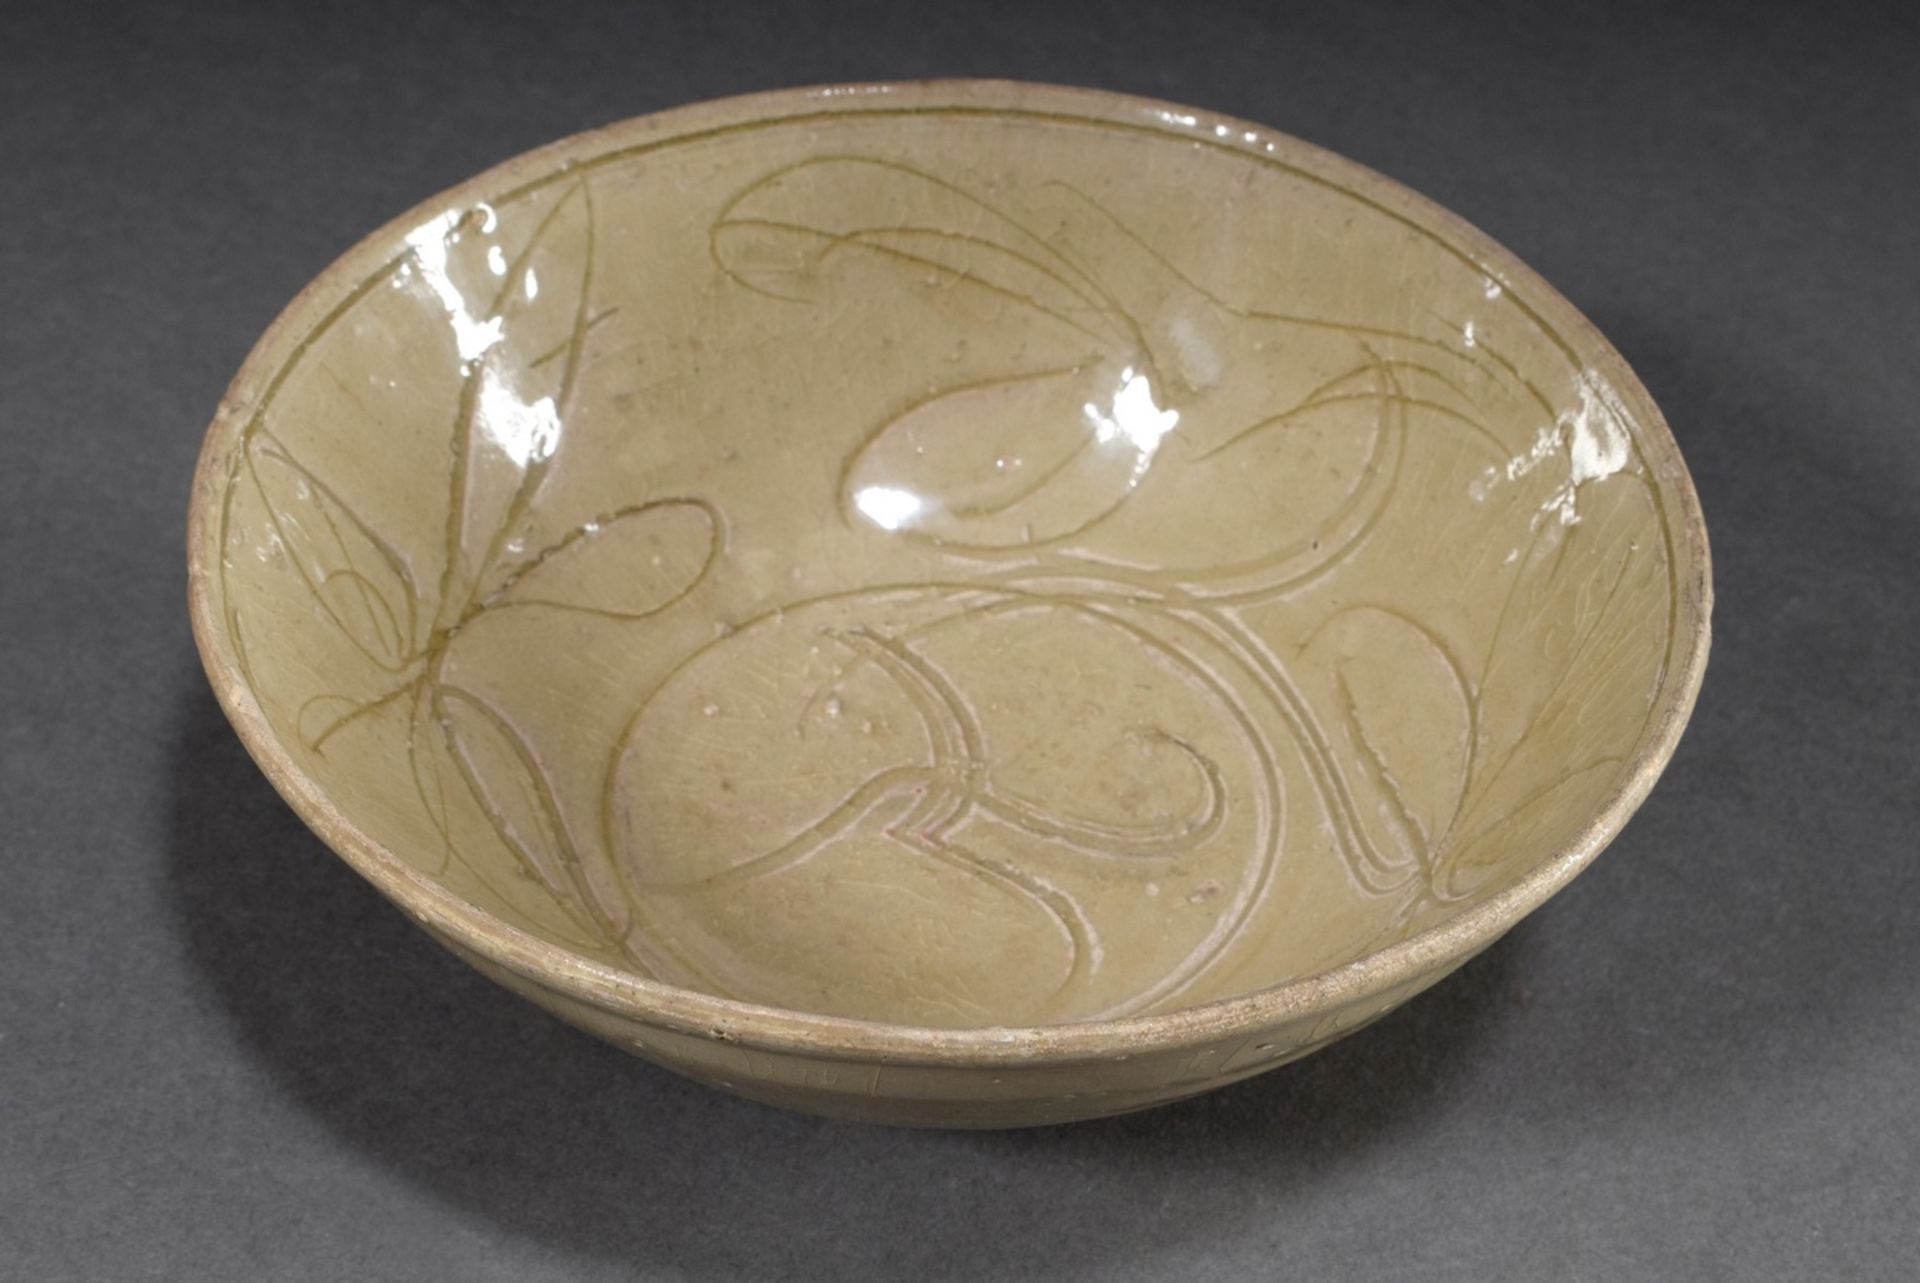 Chinese ceramic bowl with floral incised drawing and light green glaze, Qingbai ware, Song style, h